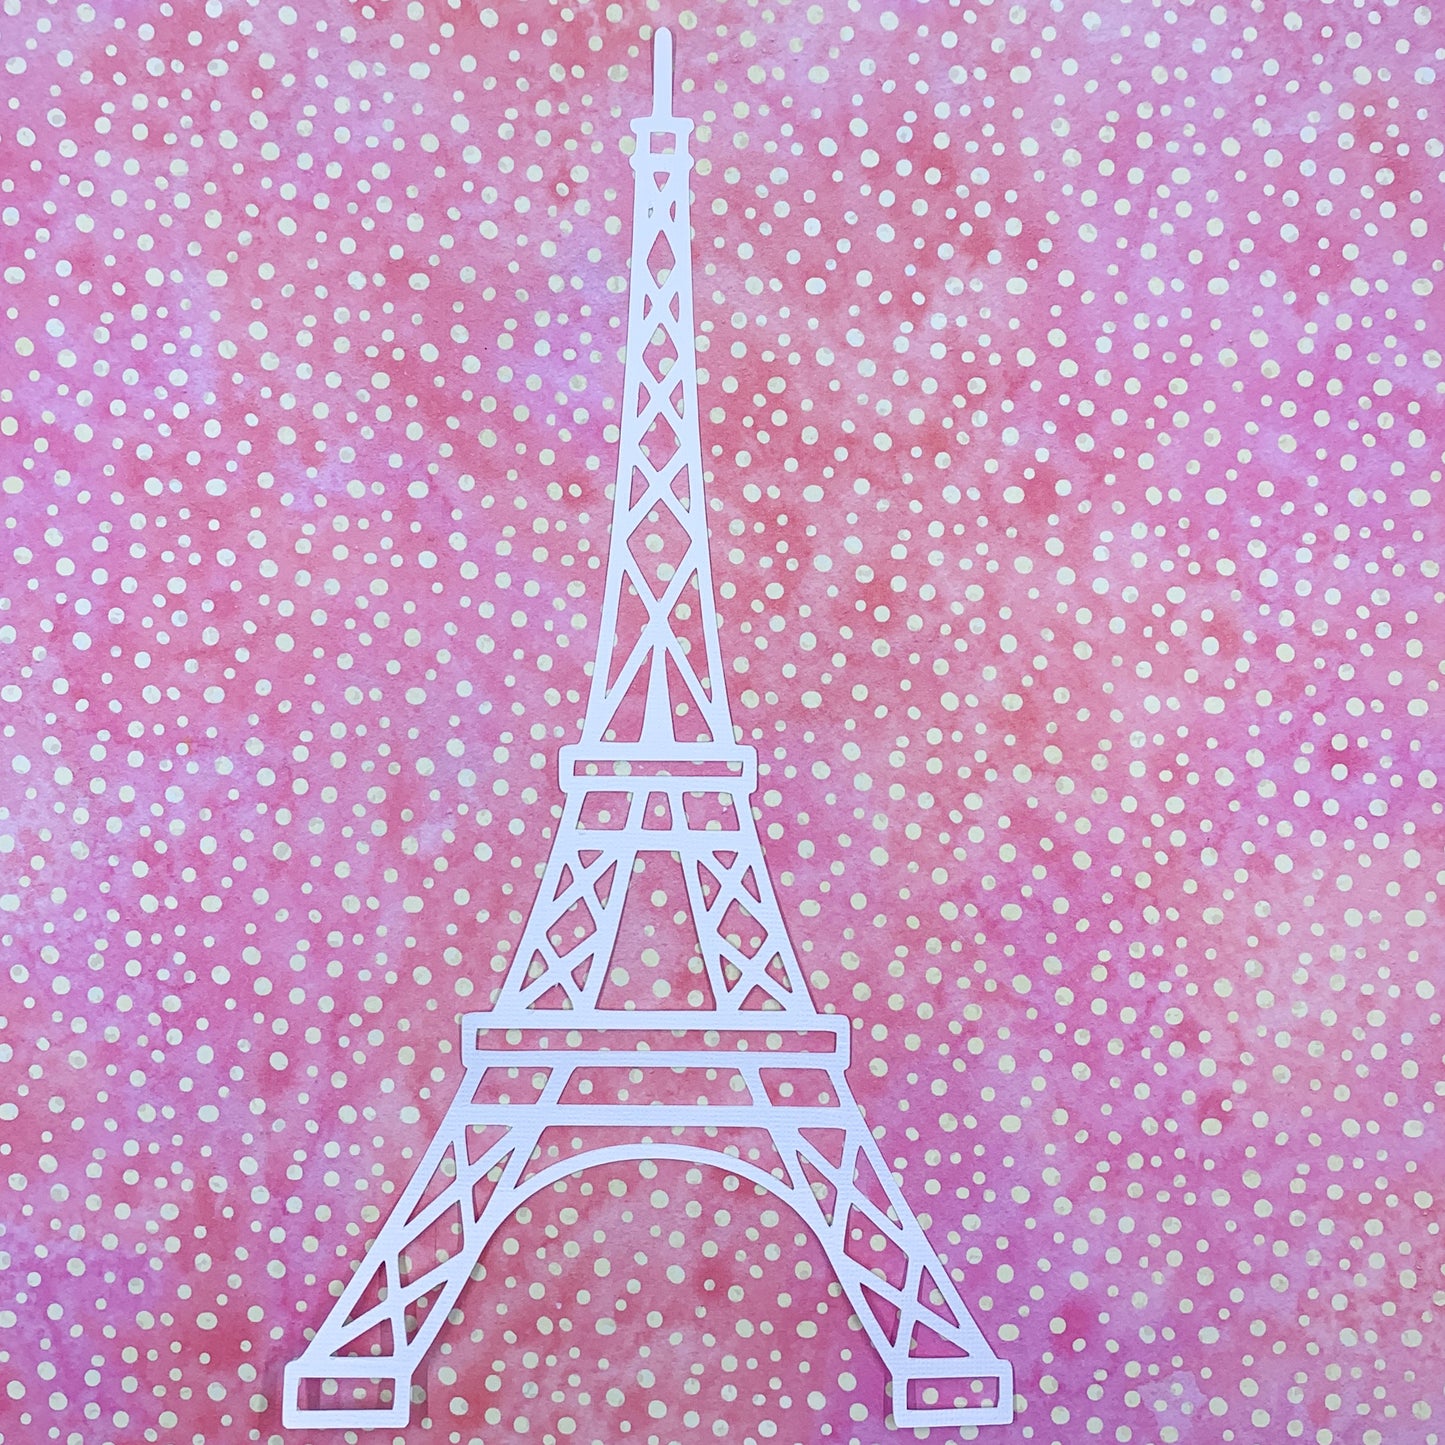 Tropicana - Eiffel Tower (large) 6"x11" White Linen Cardstock Picture-Cut - Designed by Alicia Redshaw